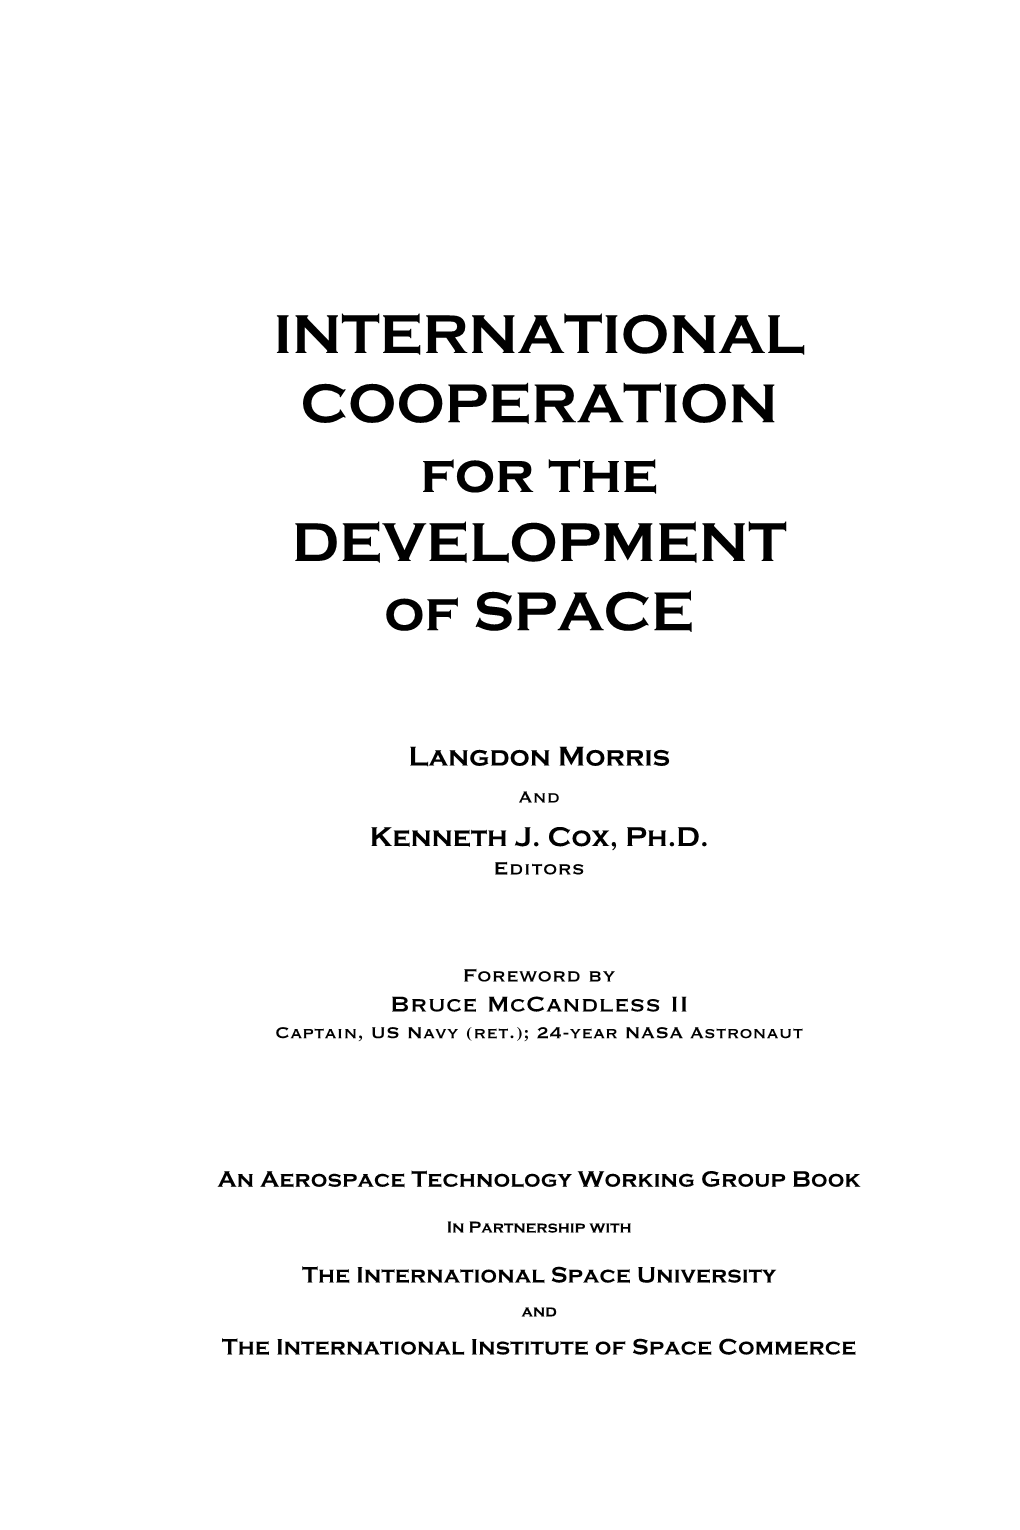 INTERNATIONAL COOPERATION for the DEVELOPMENT of SPACE